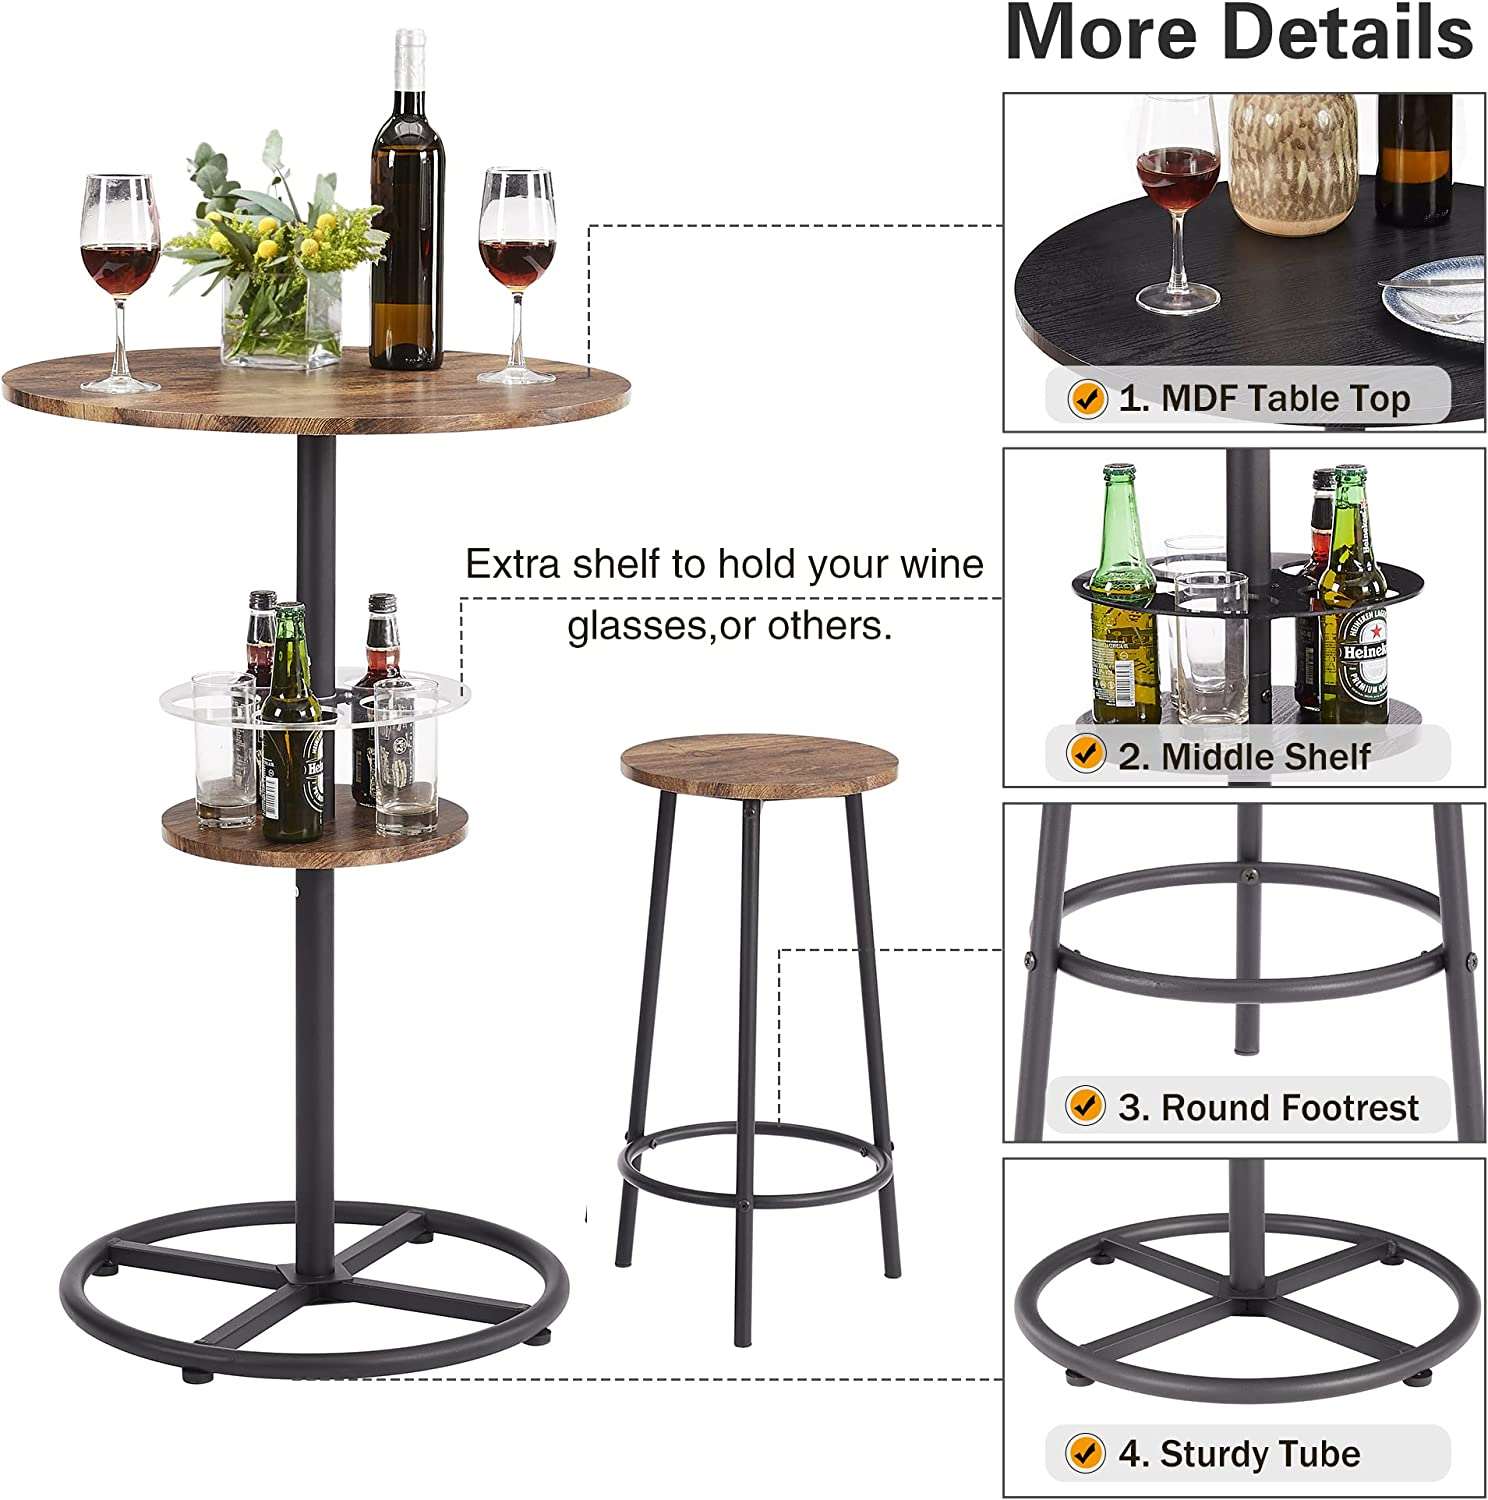 VECELO 3 Piece Bar Dining Set, Small 2-Tier Round Pub Table with Barstools, Kitchen Counter Height Wood Top Bistro for Breakfast Nook